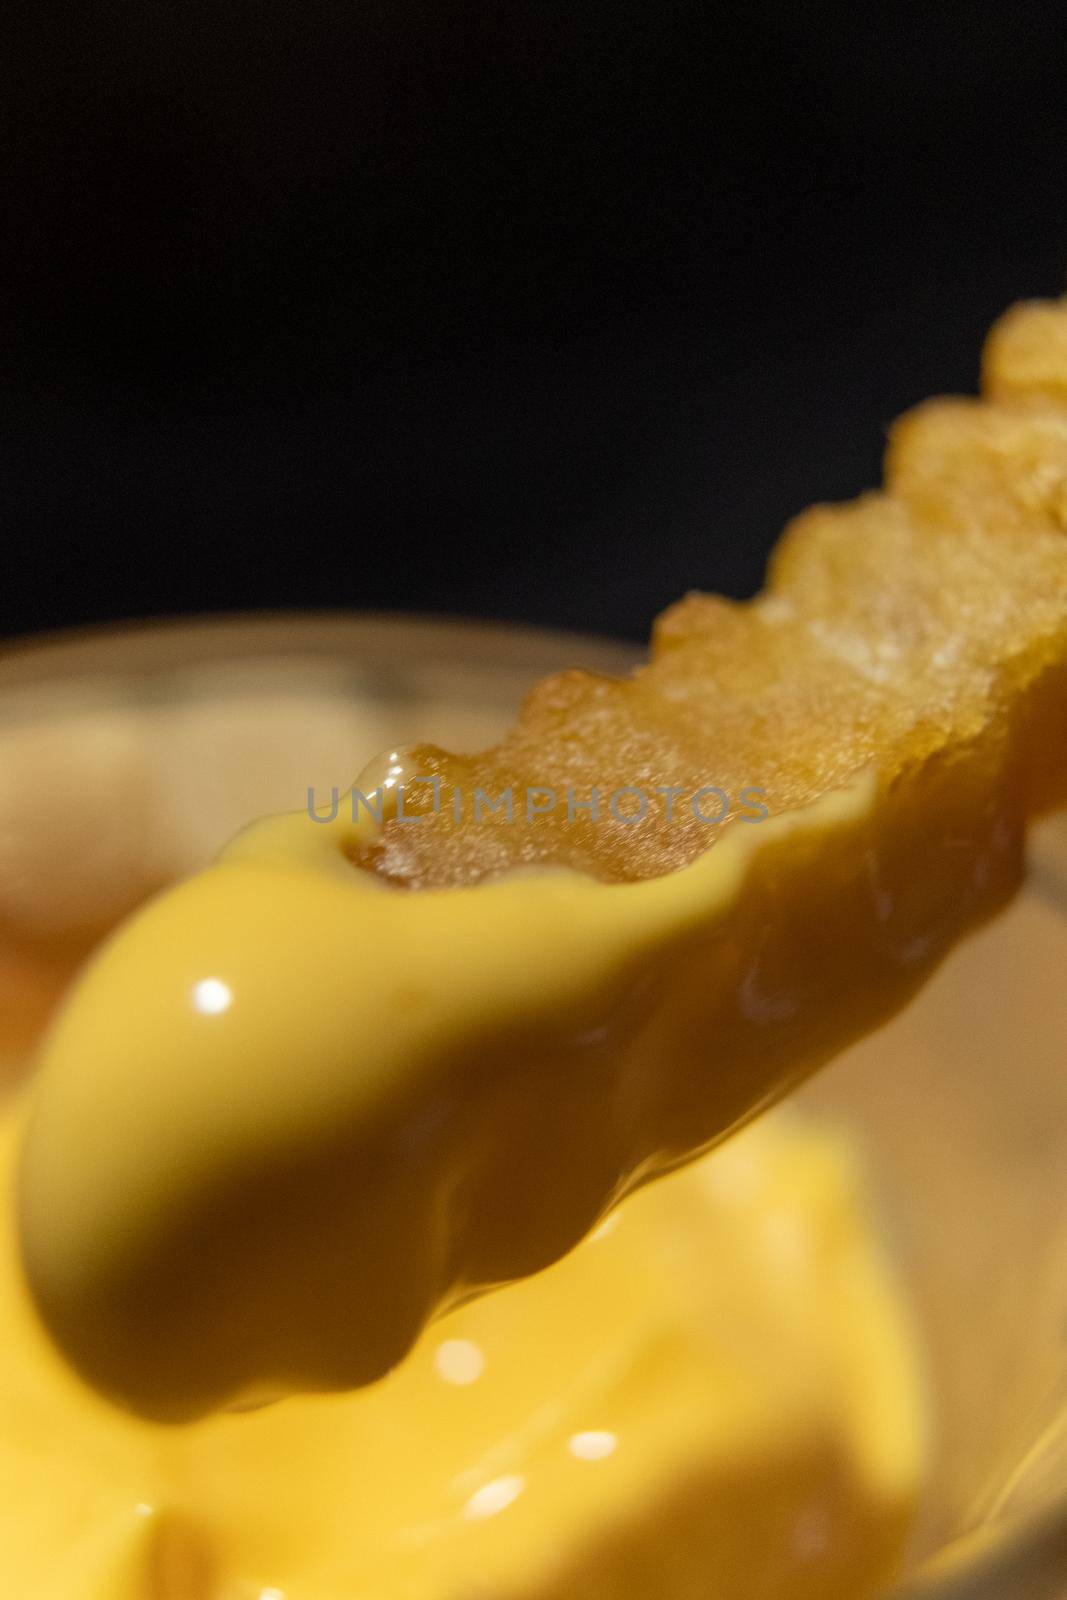 Wavy French fry being dipped into melted cheese by Kanelbulle